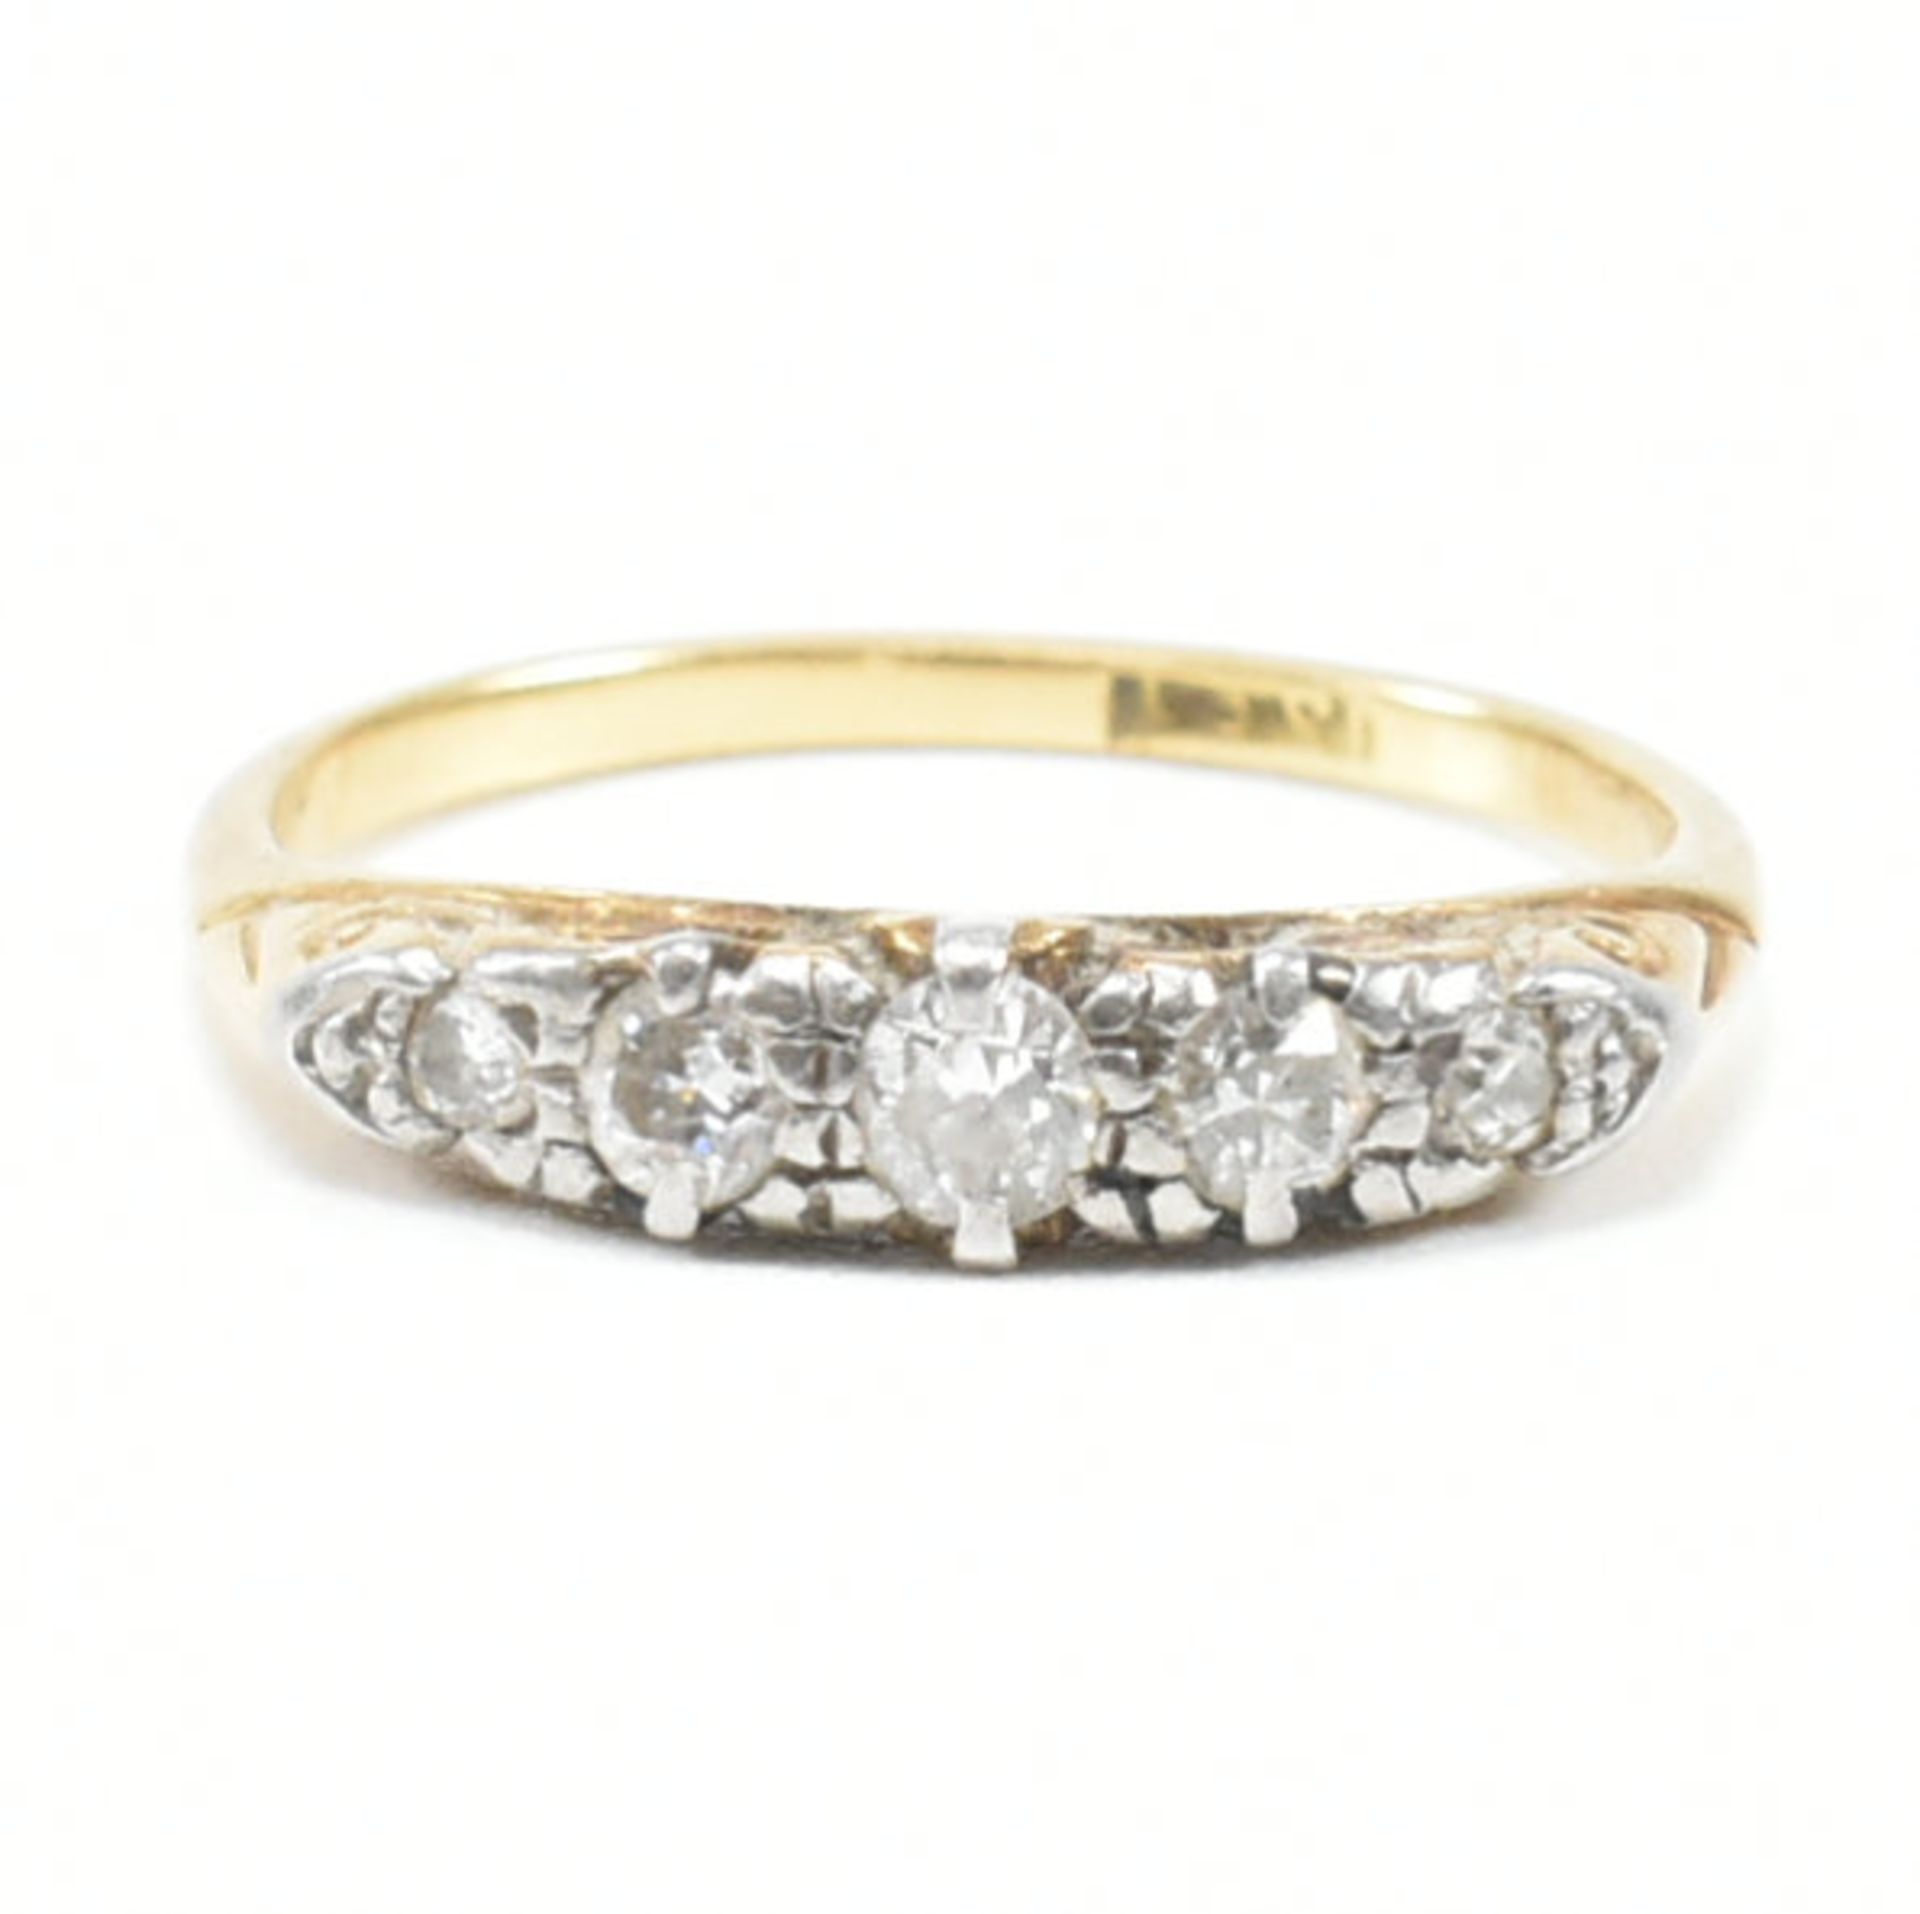 18CT GOLD & DIAMOND FIVE STONE RING - Image 12 of 12